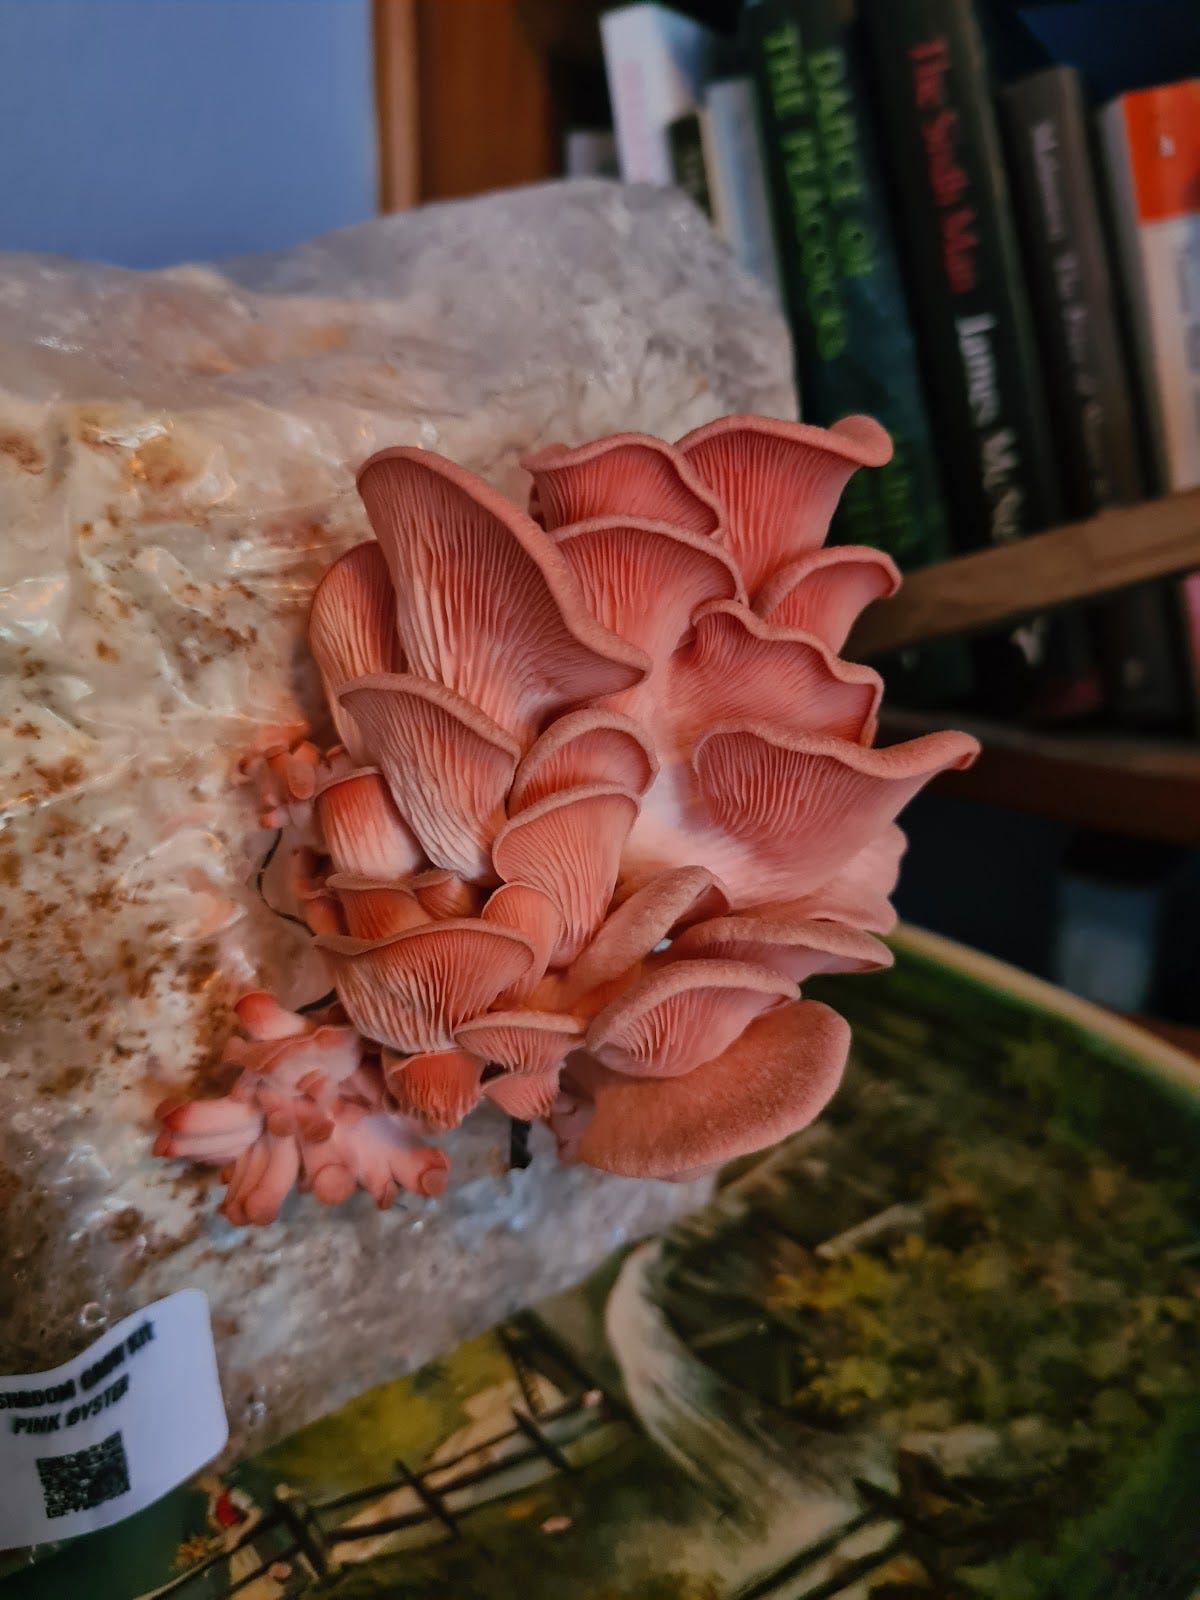 A picture of a crop of pink oyster mushrooms sprouting from a plastic bag of sawdust on a tray